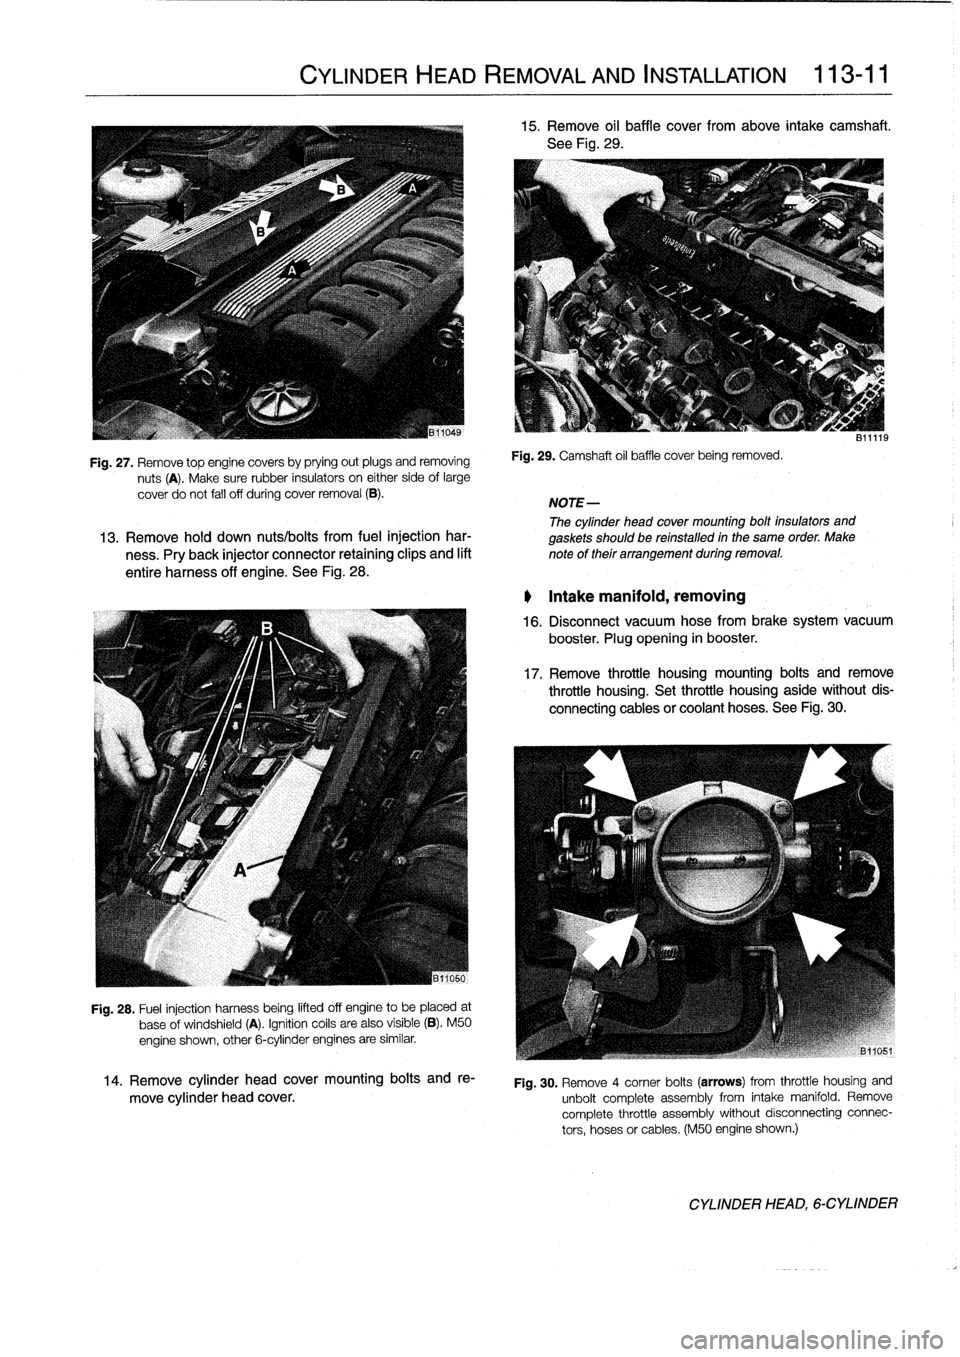 BMW 323i 1993 E36 Manual PDF 
Fig
.
27
.
Remove
top
enginecovers
by
prying
out
plugs
and
removing

nuts
(A)
.
Make
sure
rubber
insulators
on
either
side
of
large

cover
do
not
fall
off
during
cover
removal
(B)
.

Fig
.
28
.
Fuel
